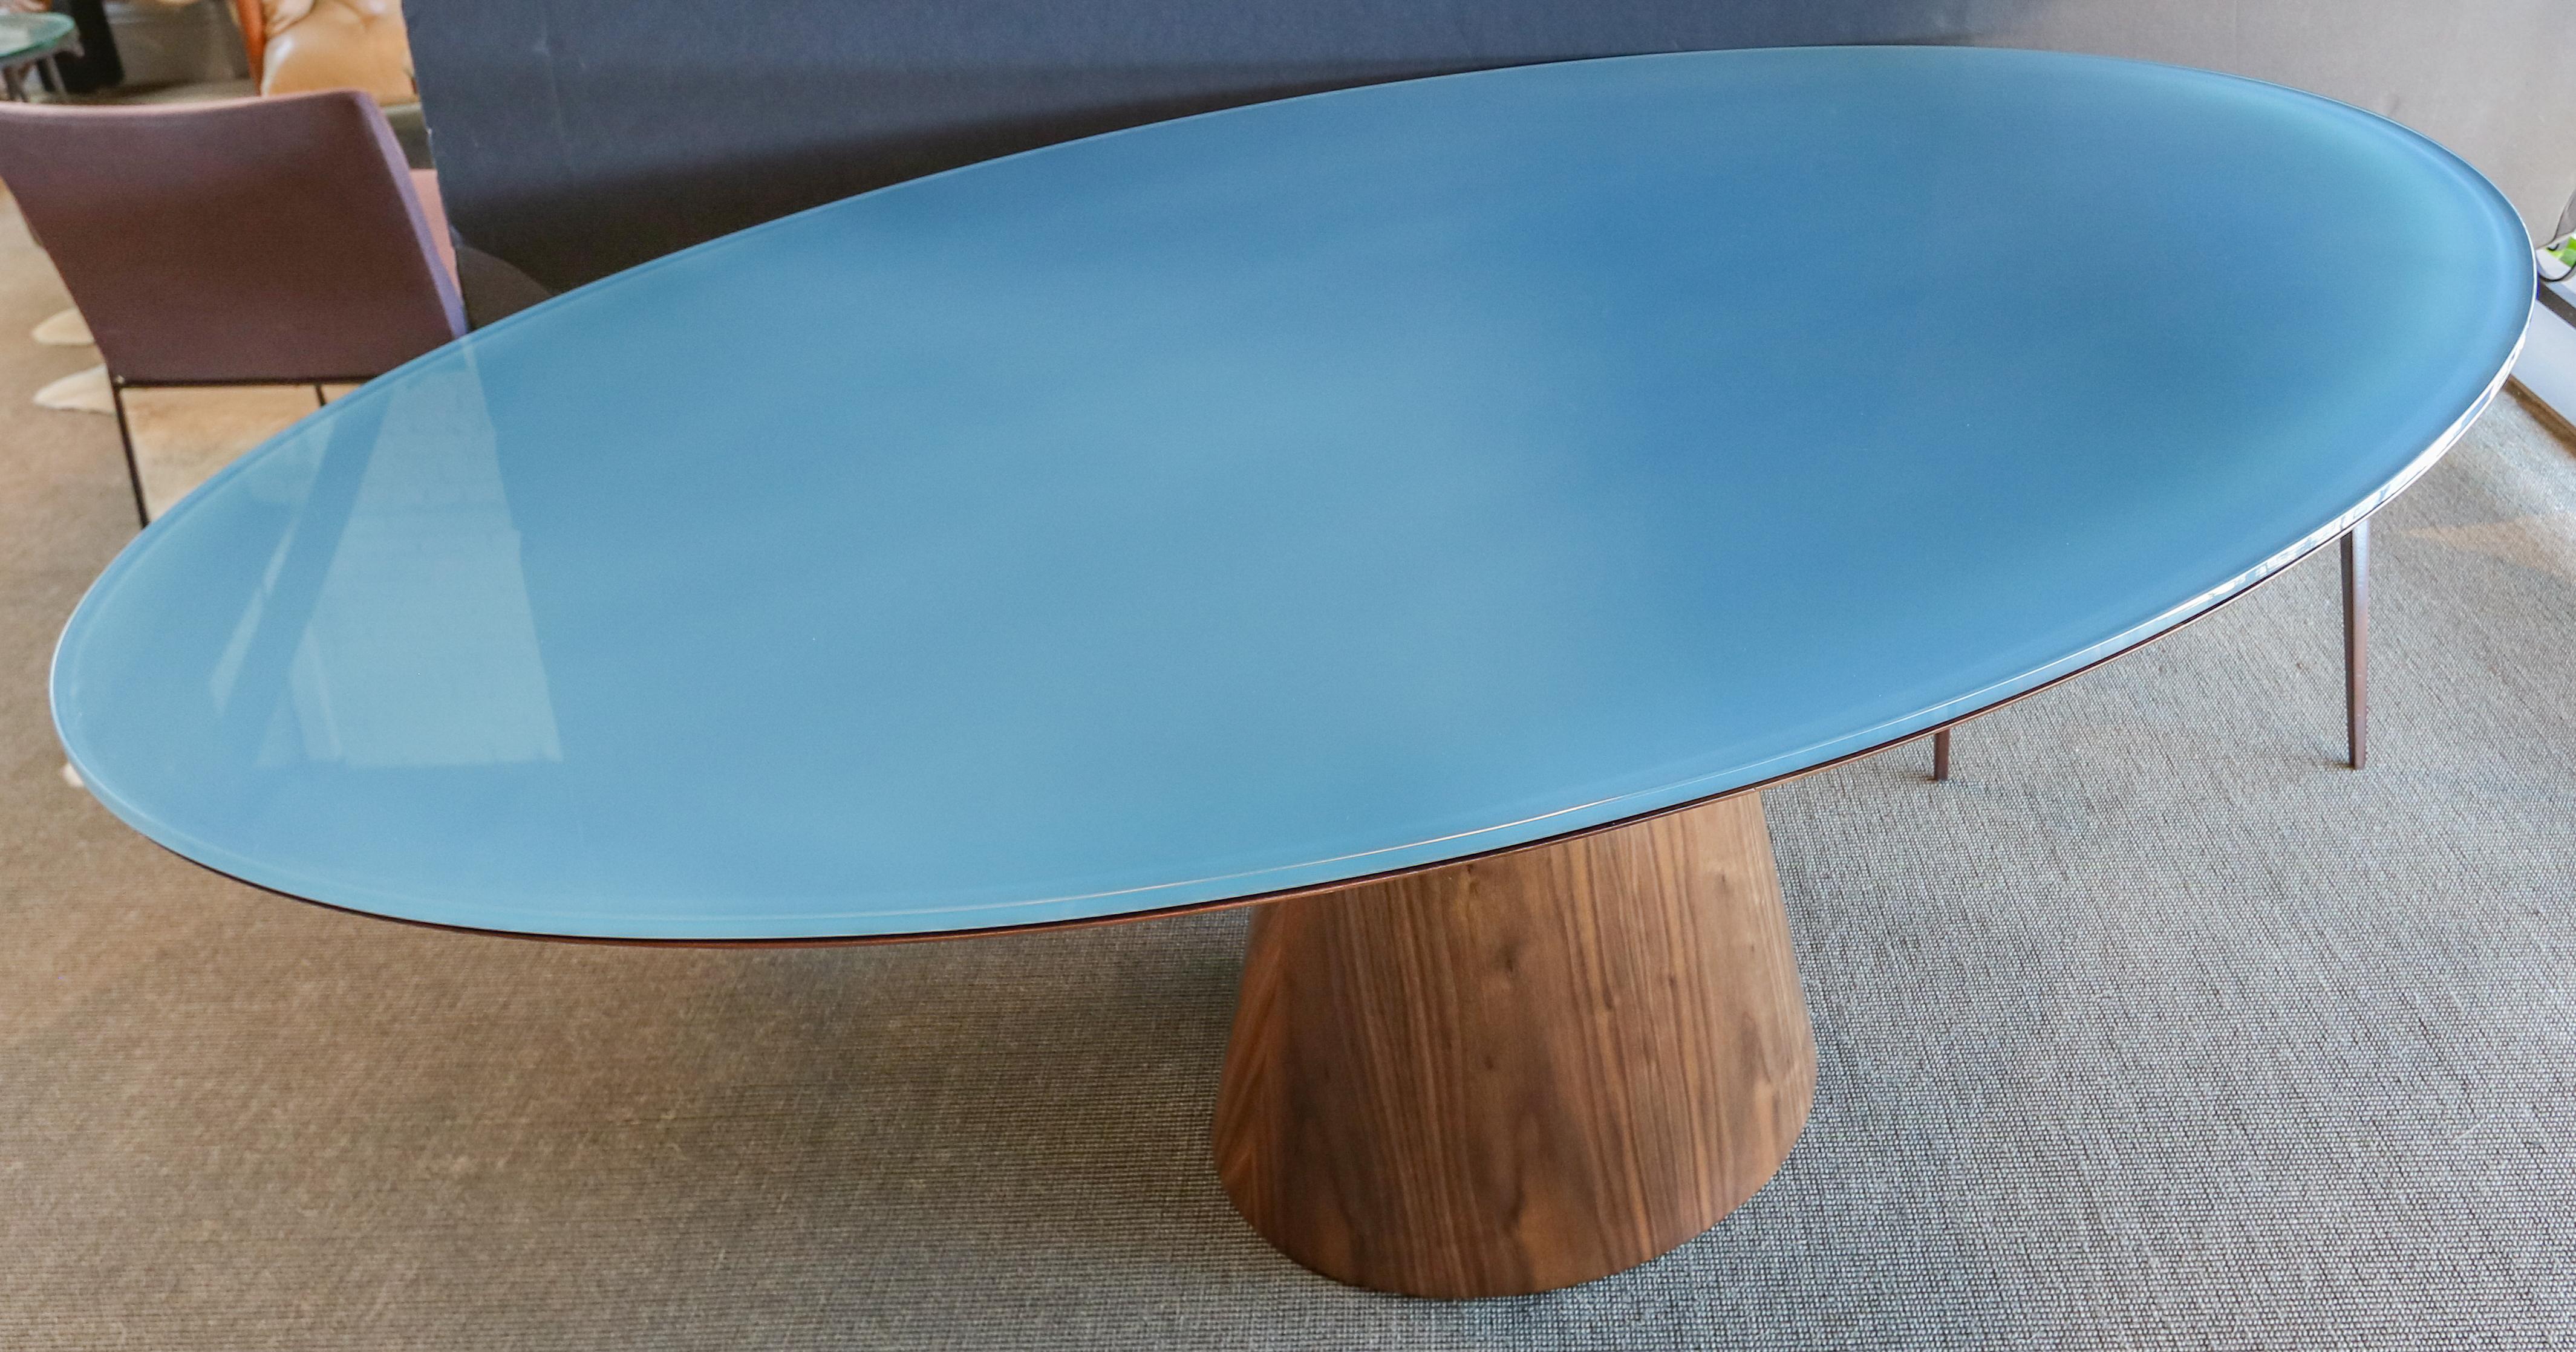 Custom oval dining table with pedestal leg made in American walnut with blue reverse painted glass top.  Made in Los Angeles by Adesso Imports.

Can be done in different woods, finishes and sizes.